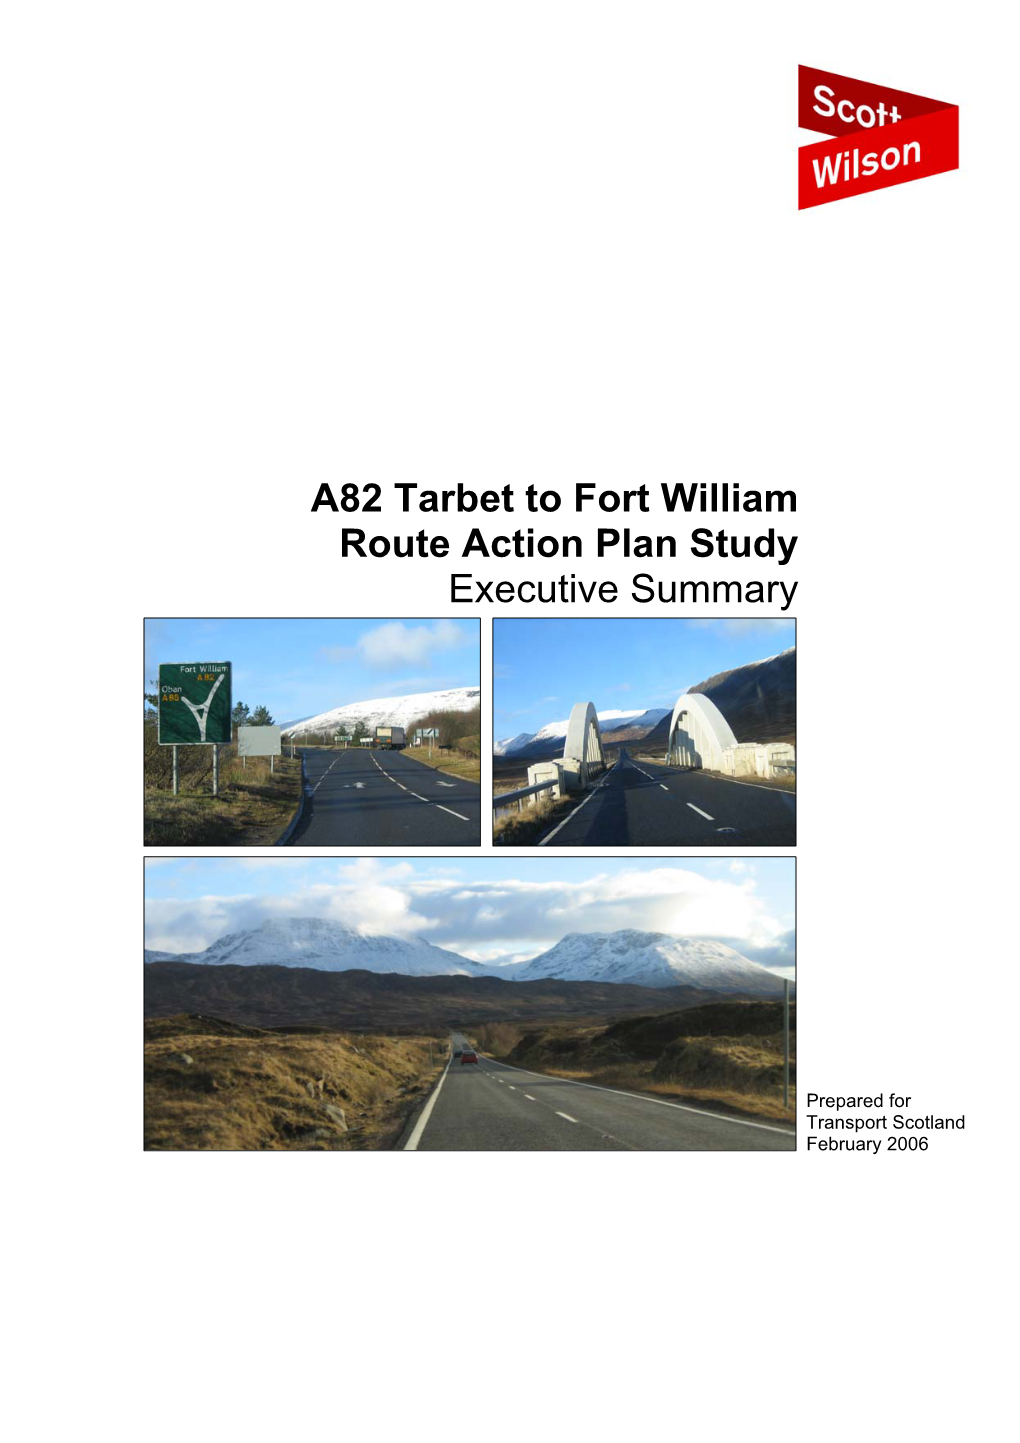 A82 Tarbet to Fort William Route Action Plan Study Executive Summary